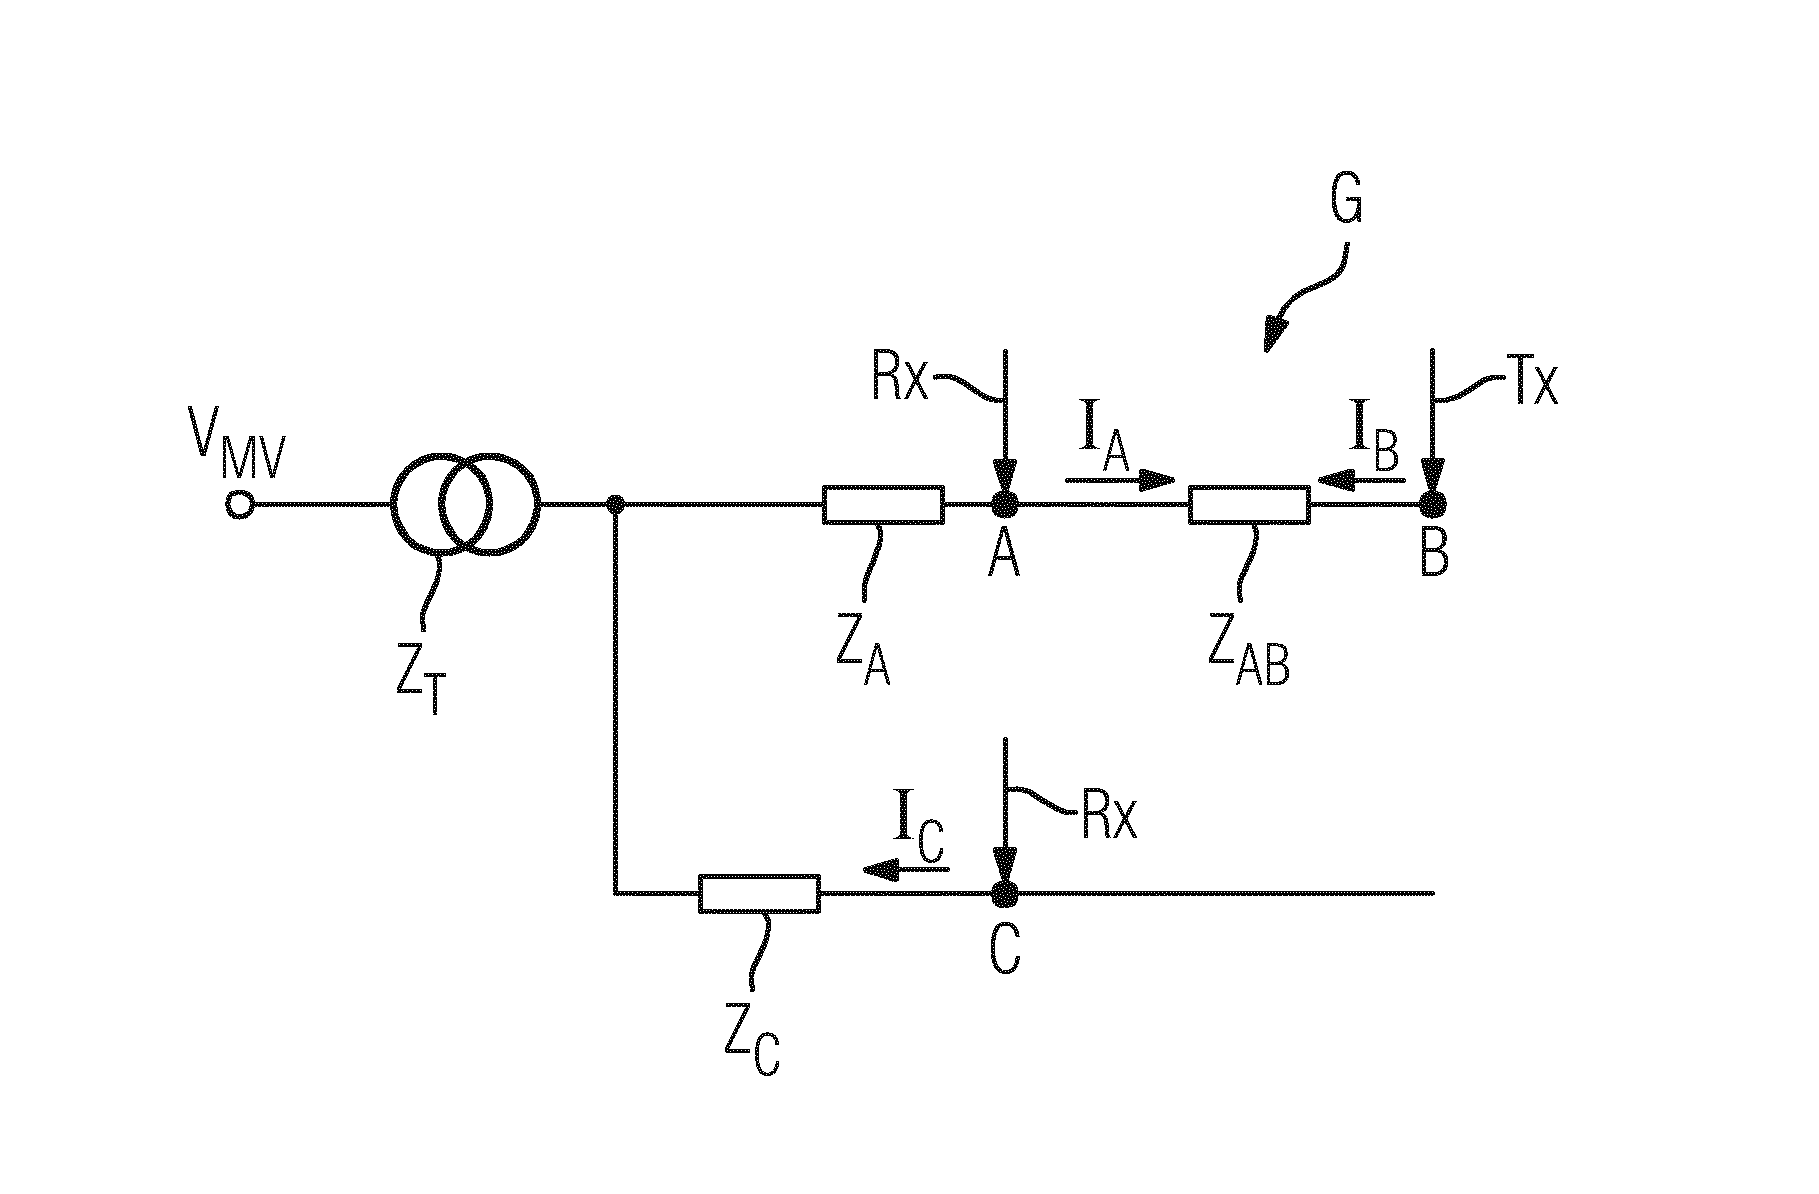 Signaling and controlling a power grid coupling actuators